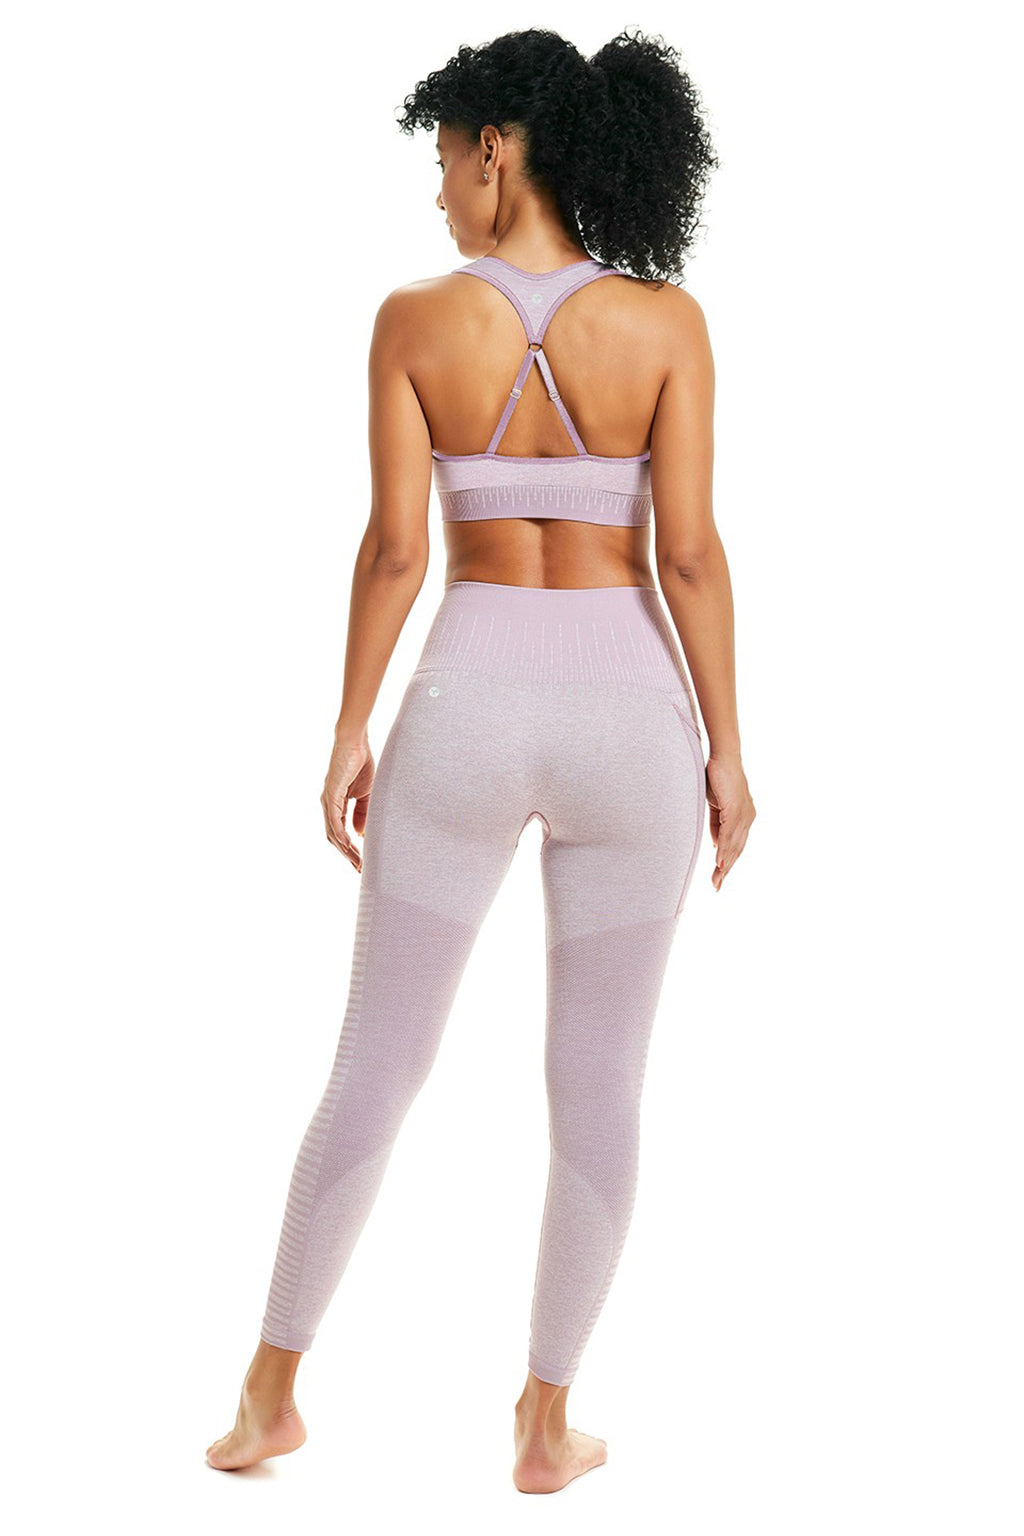 FITNESS Legging with double and versatile waistband